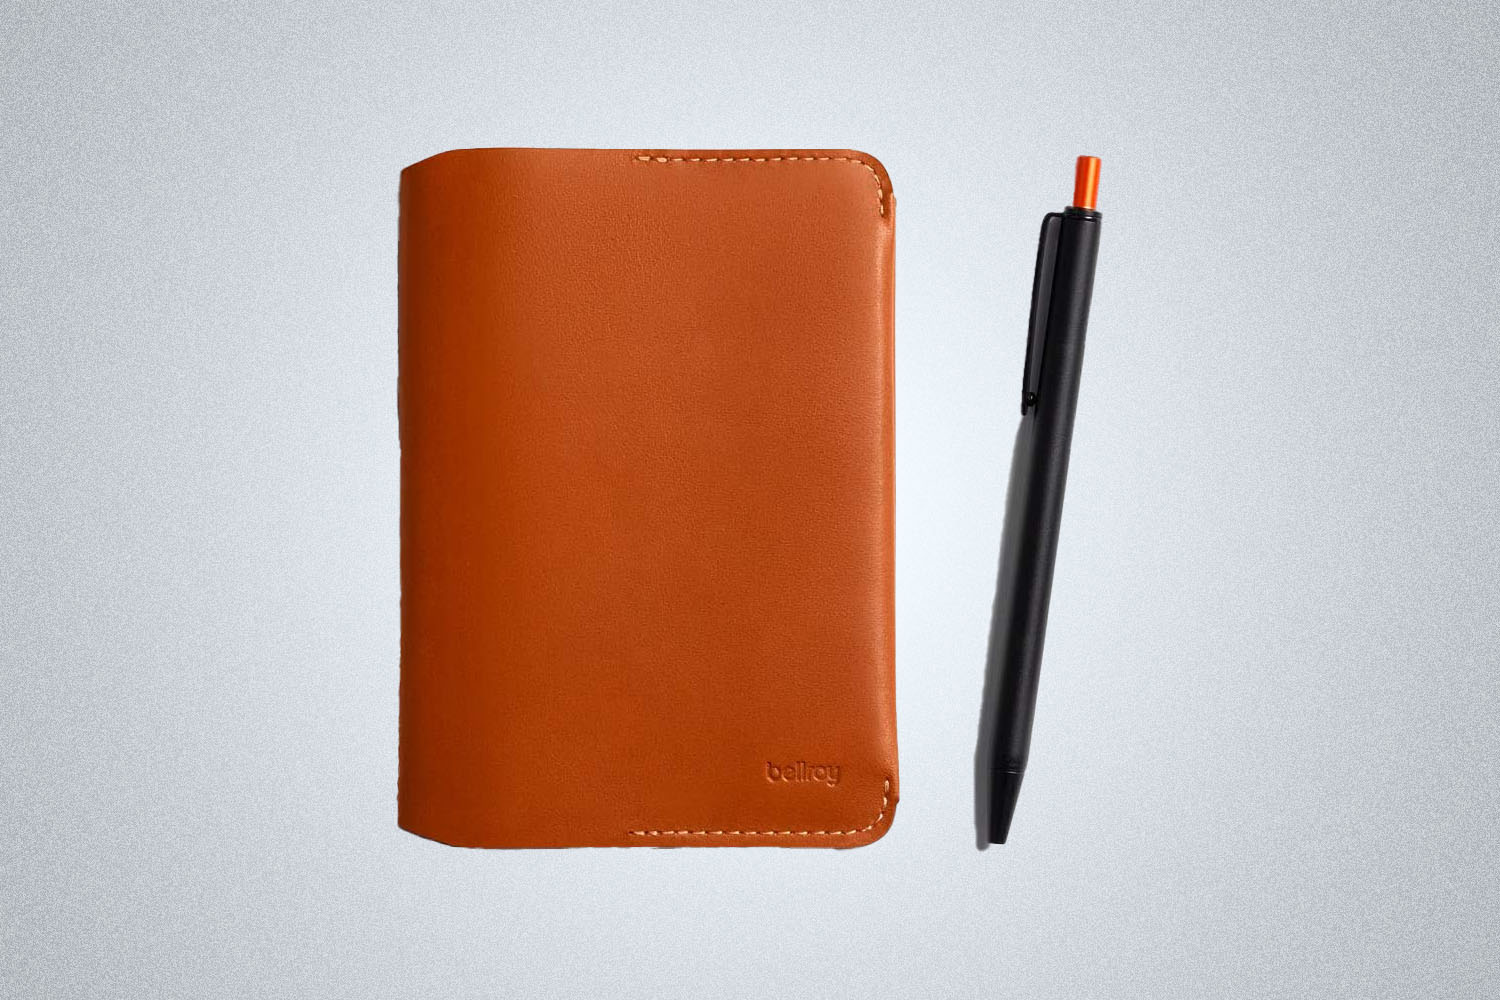 Bellroy Notebook Cover and Mini Pen